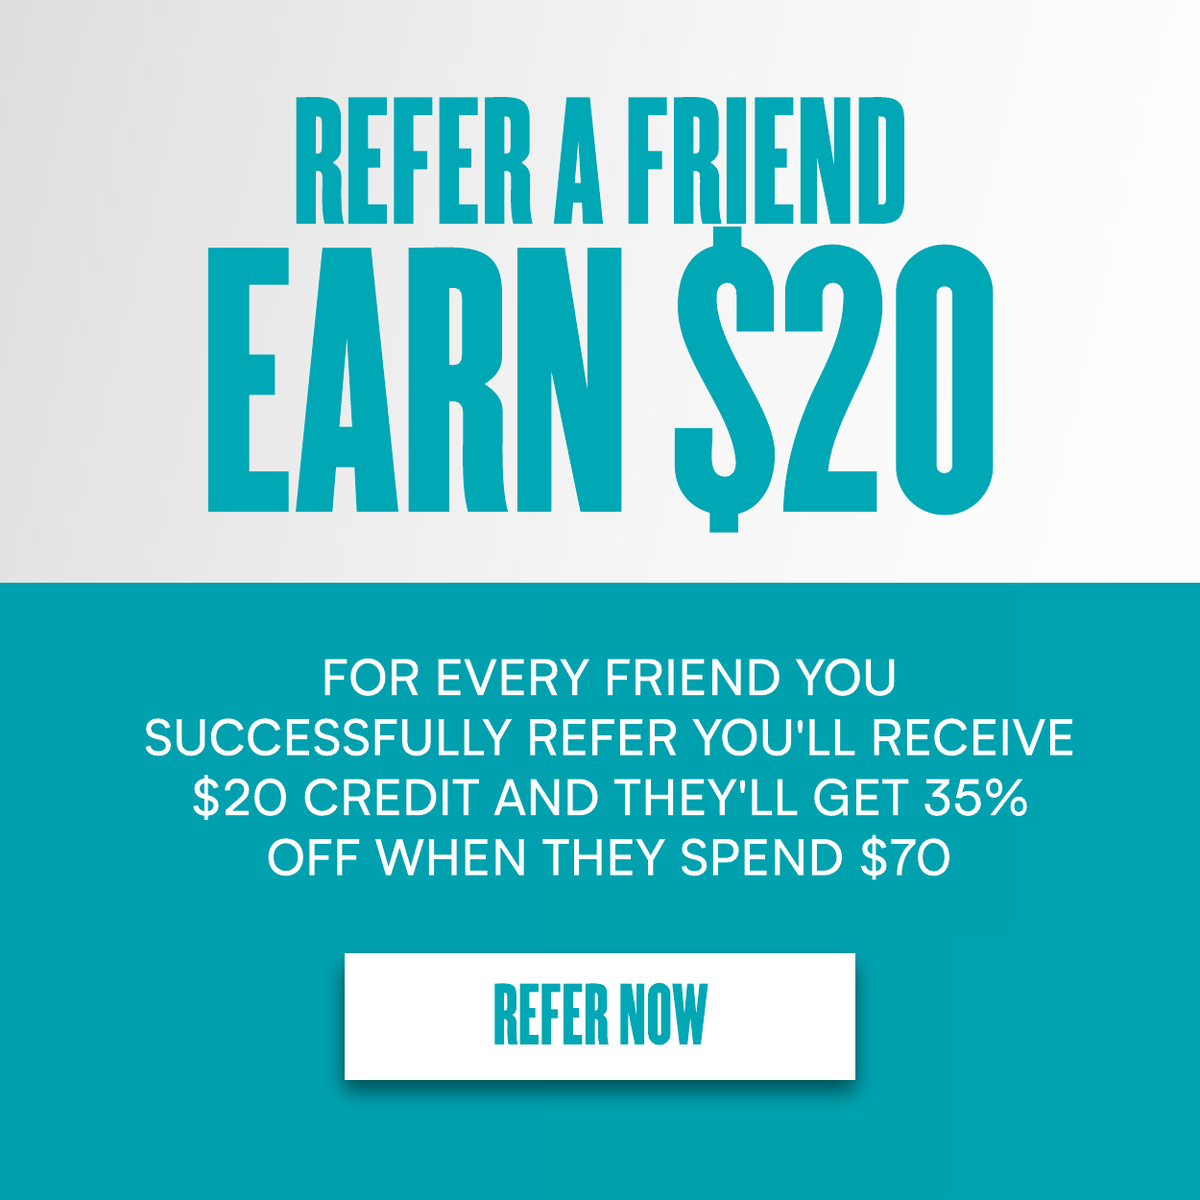 Refer a friend and earn $30